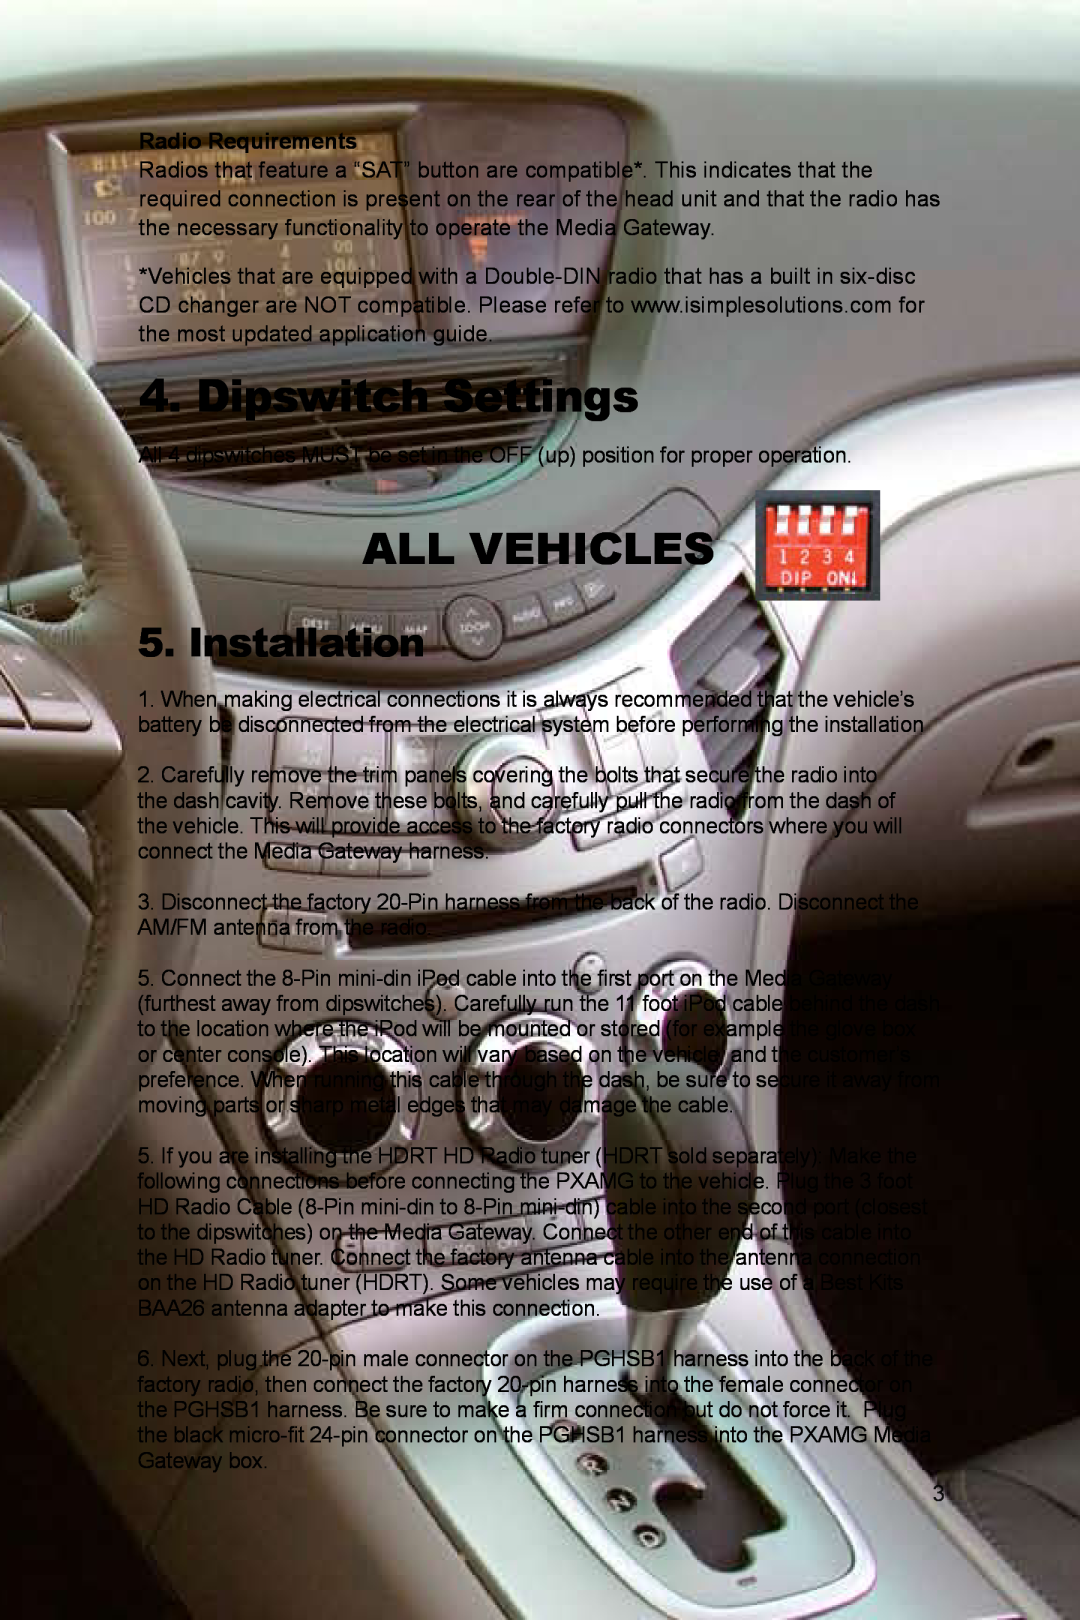 Peripheral Electronics PGHSB1 owner manual Dipswitch Settings, Installation, All Vehicles, Radio Requirements 